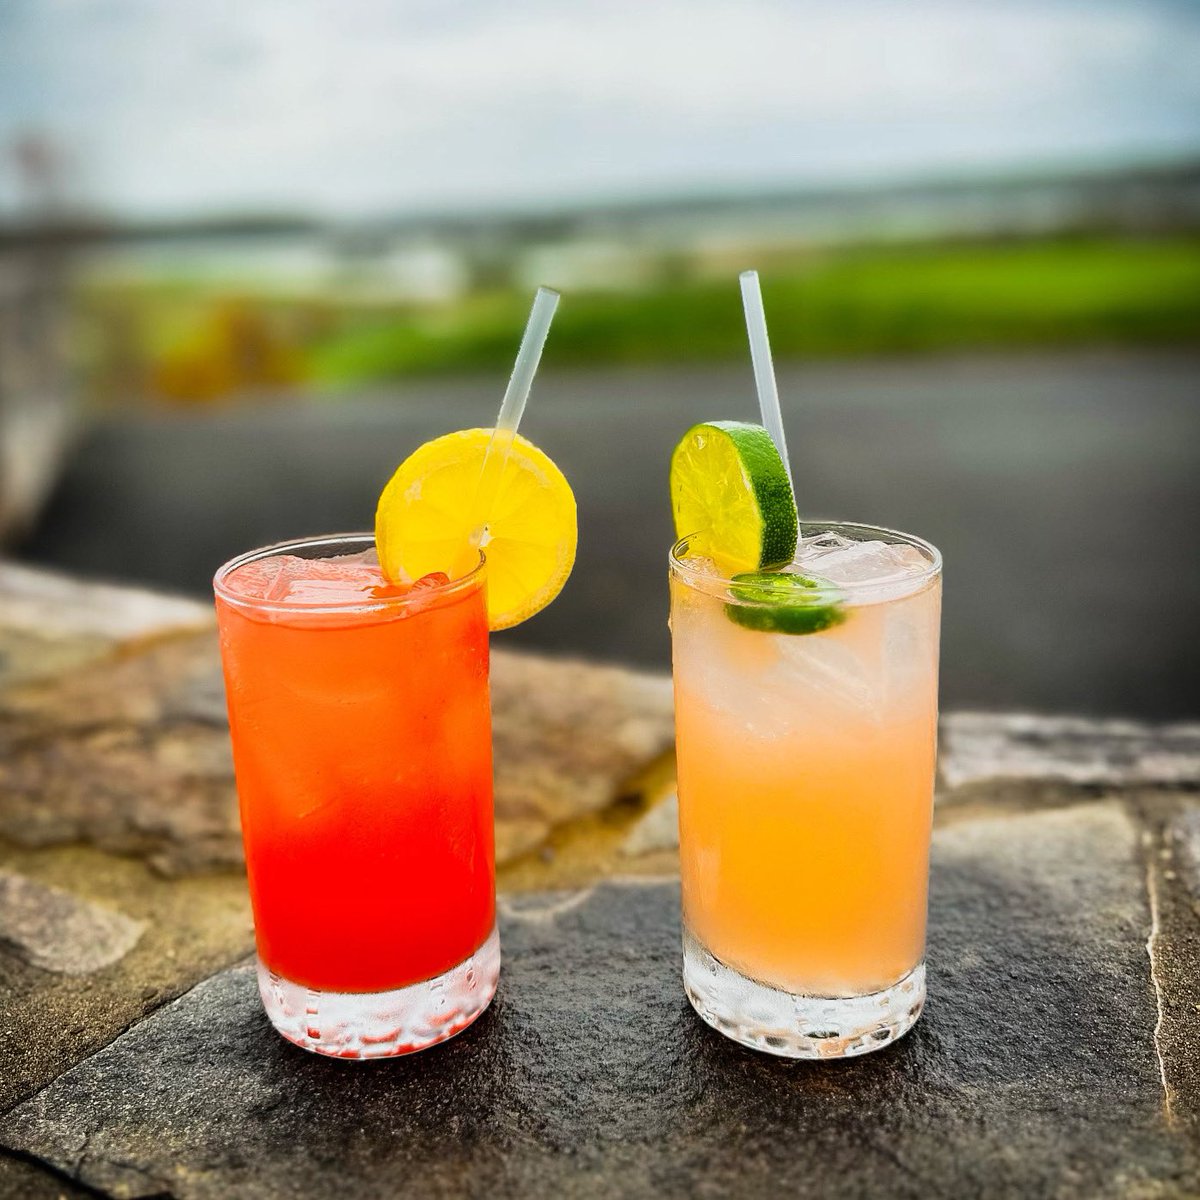 Get ready to master the Masters this weekend at @trumpgolfdc. Savor the exquisite flavors of our Azalea and Paloma cocktails as you soak in the elegance and excitement of the game. #mastersweekend #azalea #paloma #trumpgolf #masters